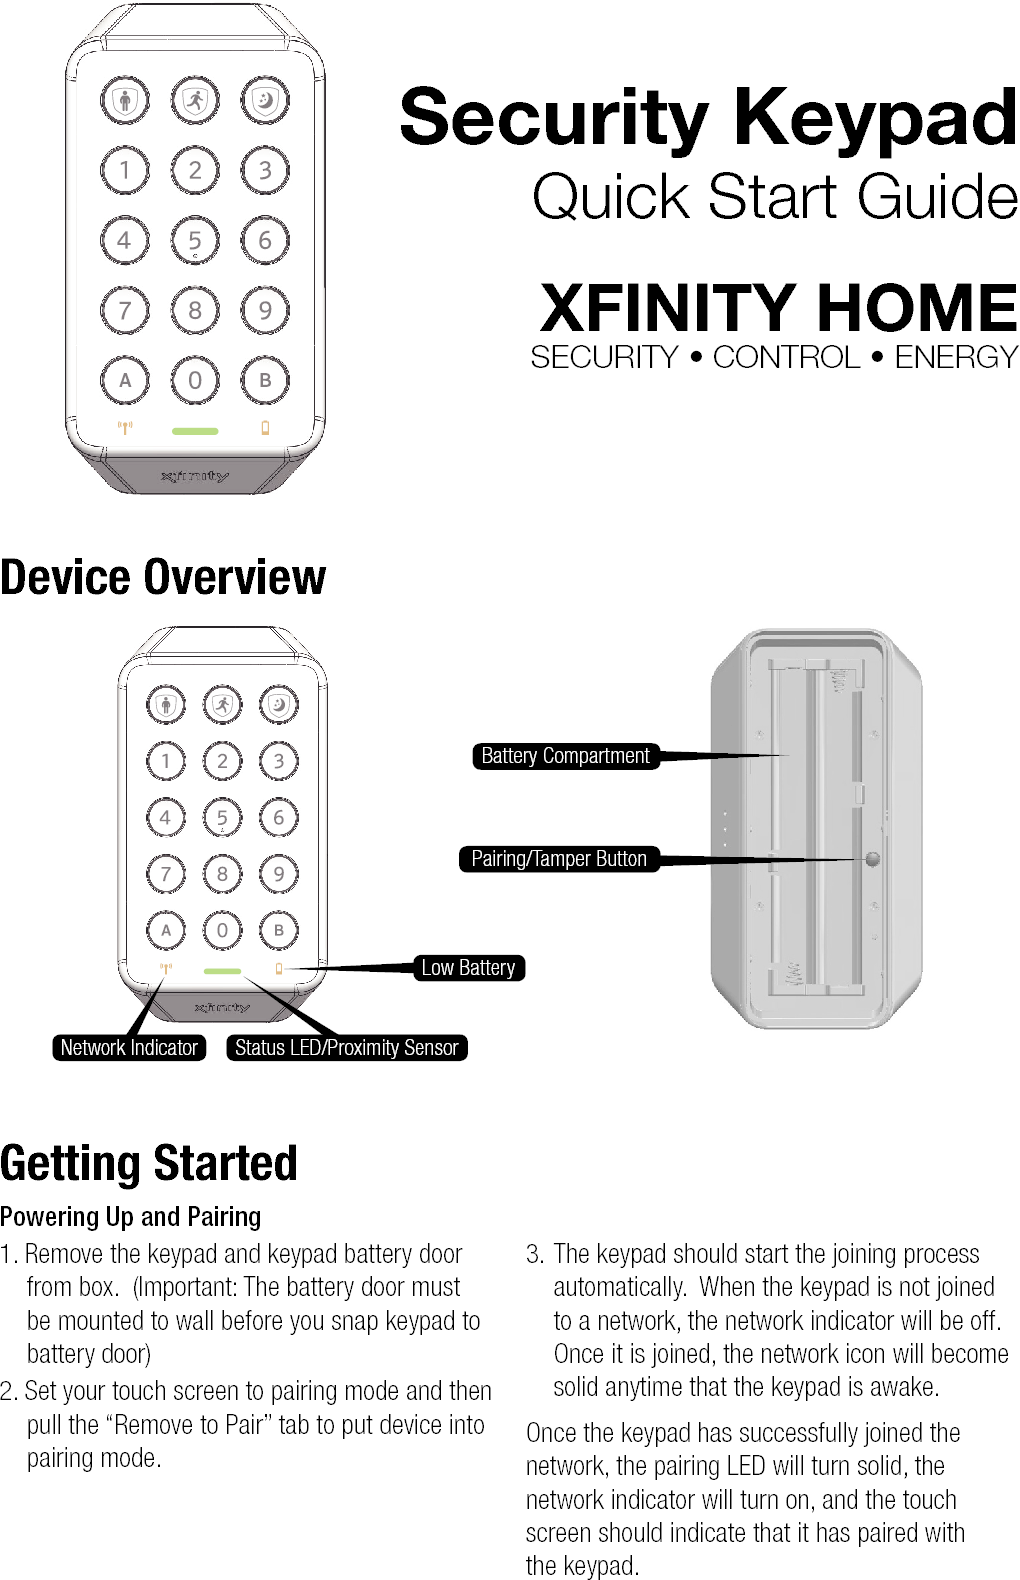 Security KeypadQuick Start GuideXFINITY HOMESECURITY • CONTROL • ENERGYDevice OverviewGetting StartedPowering Up and Pairing1. Remove the keypad and keypad battery door from box.  (Important: The battery door must be mounted to wall before you snap keypad to battery door)2. Set your touch screen to pairing mode and then pull the “Remove to Pair” tab to put device into pairing mode.3. The keypad should start the joining process automatically.  When the keypad is not joined to a network, the network indicator will be off.  Once it is joined, the network icon will become solid anytime that the keypad is awake. Once the keypad has successfully joined the network, the pairing LED will turn solid, the network indicator will turn on, and the touch screen should indicate that it has paired with  the keypad.Battery CompartmentLow BatteryNetwork Indicator Status LED/Proximity SensorPairing/Tamper Button